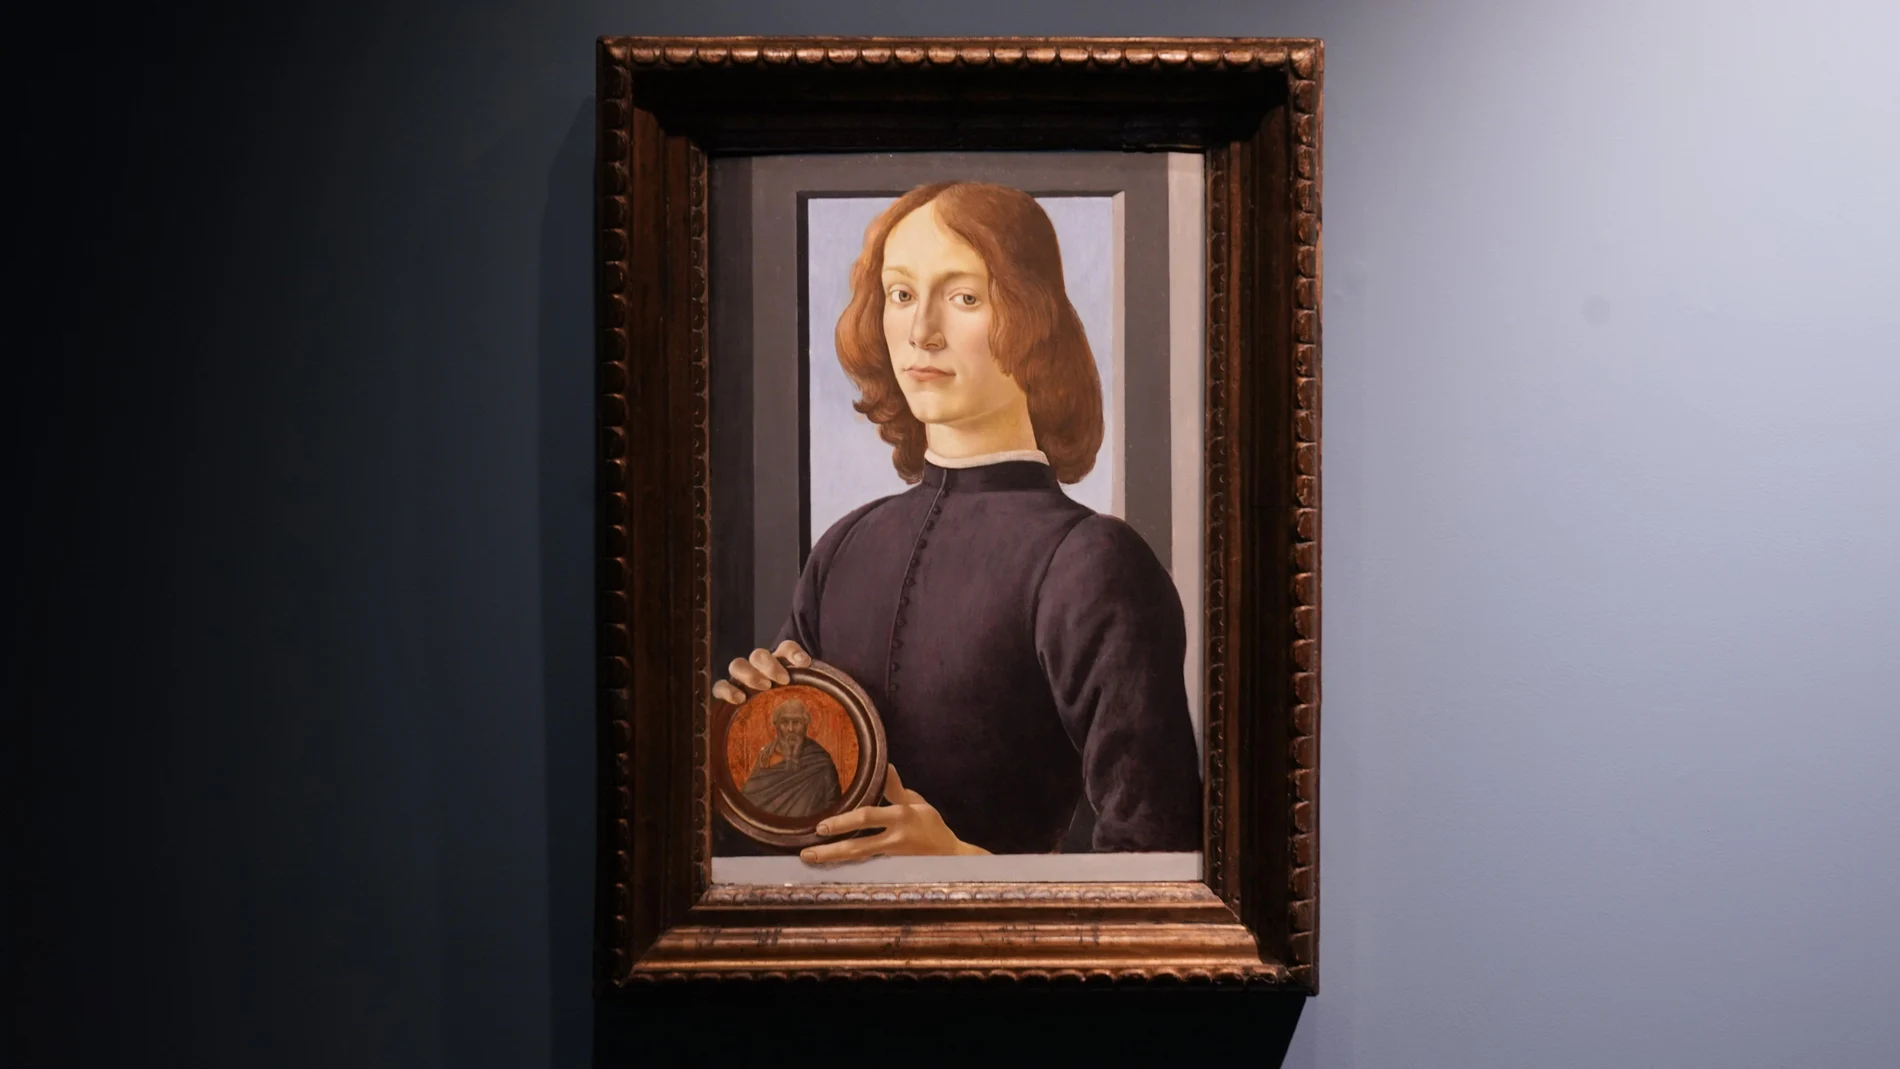 Sandro Botticelli's 15th-century painting called "Young Man Holding a Roundel" is displayed at Sotheby's on Sept. 23, 2020, in New York. The painting will go on auction next year and art watchers will be seeing if it fetches more than its eye-watering $80 million estimate, despite the pandemic. Botticelliâ€™s 15th-century portrait of a nobleman in â€œYoung Man Holding a Roundelâ€ is the highlight of Sothebyâ€™s Masters Week sale series in New York in January. (AP Photo/Seth Wenig)